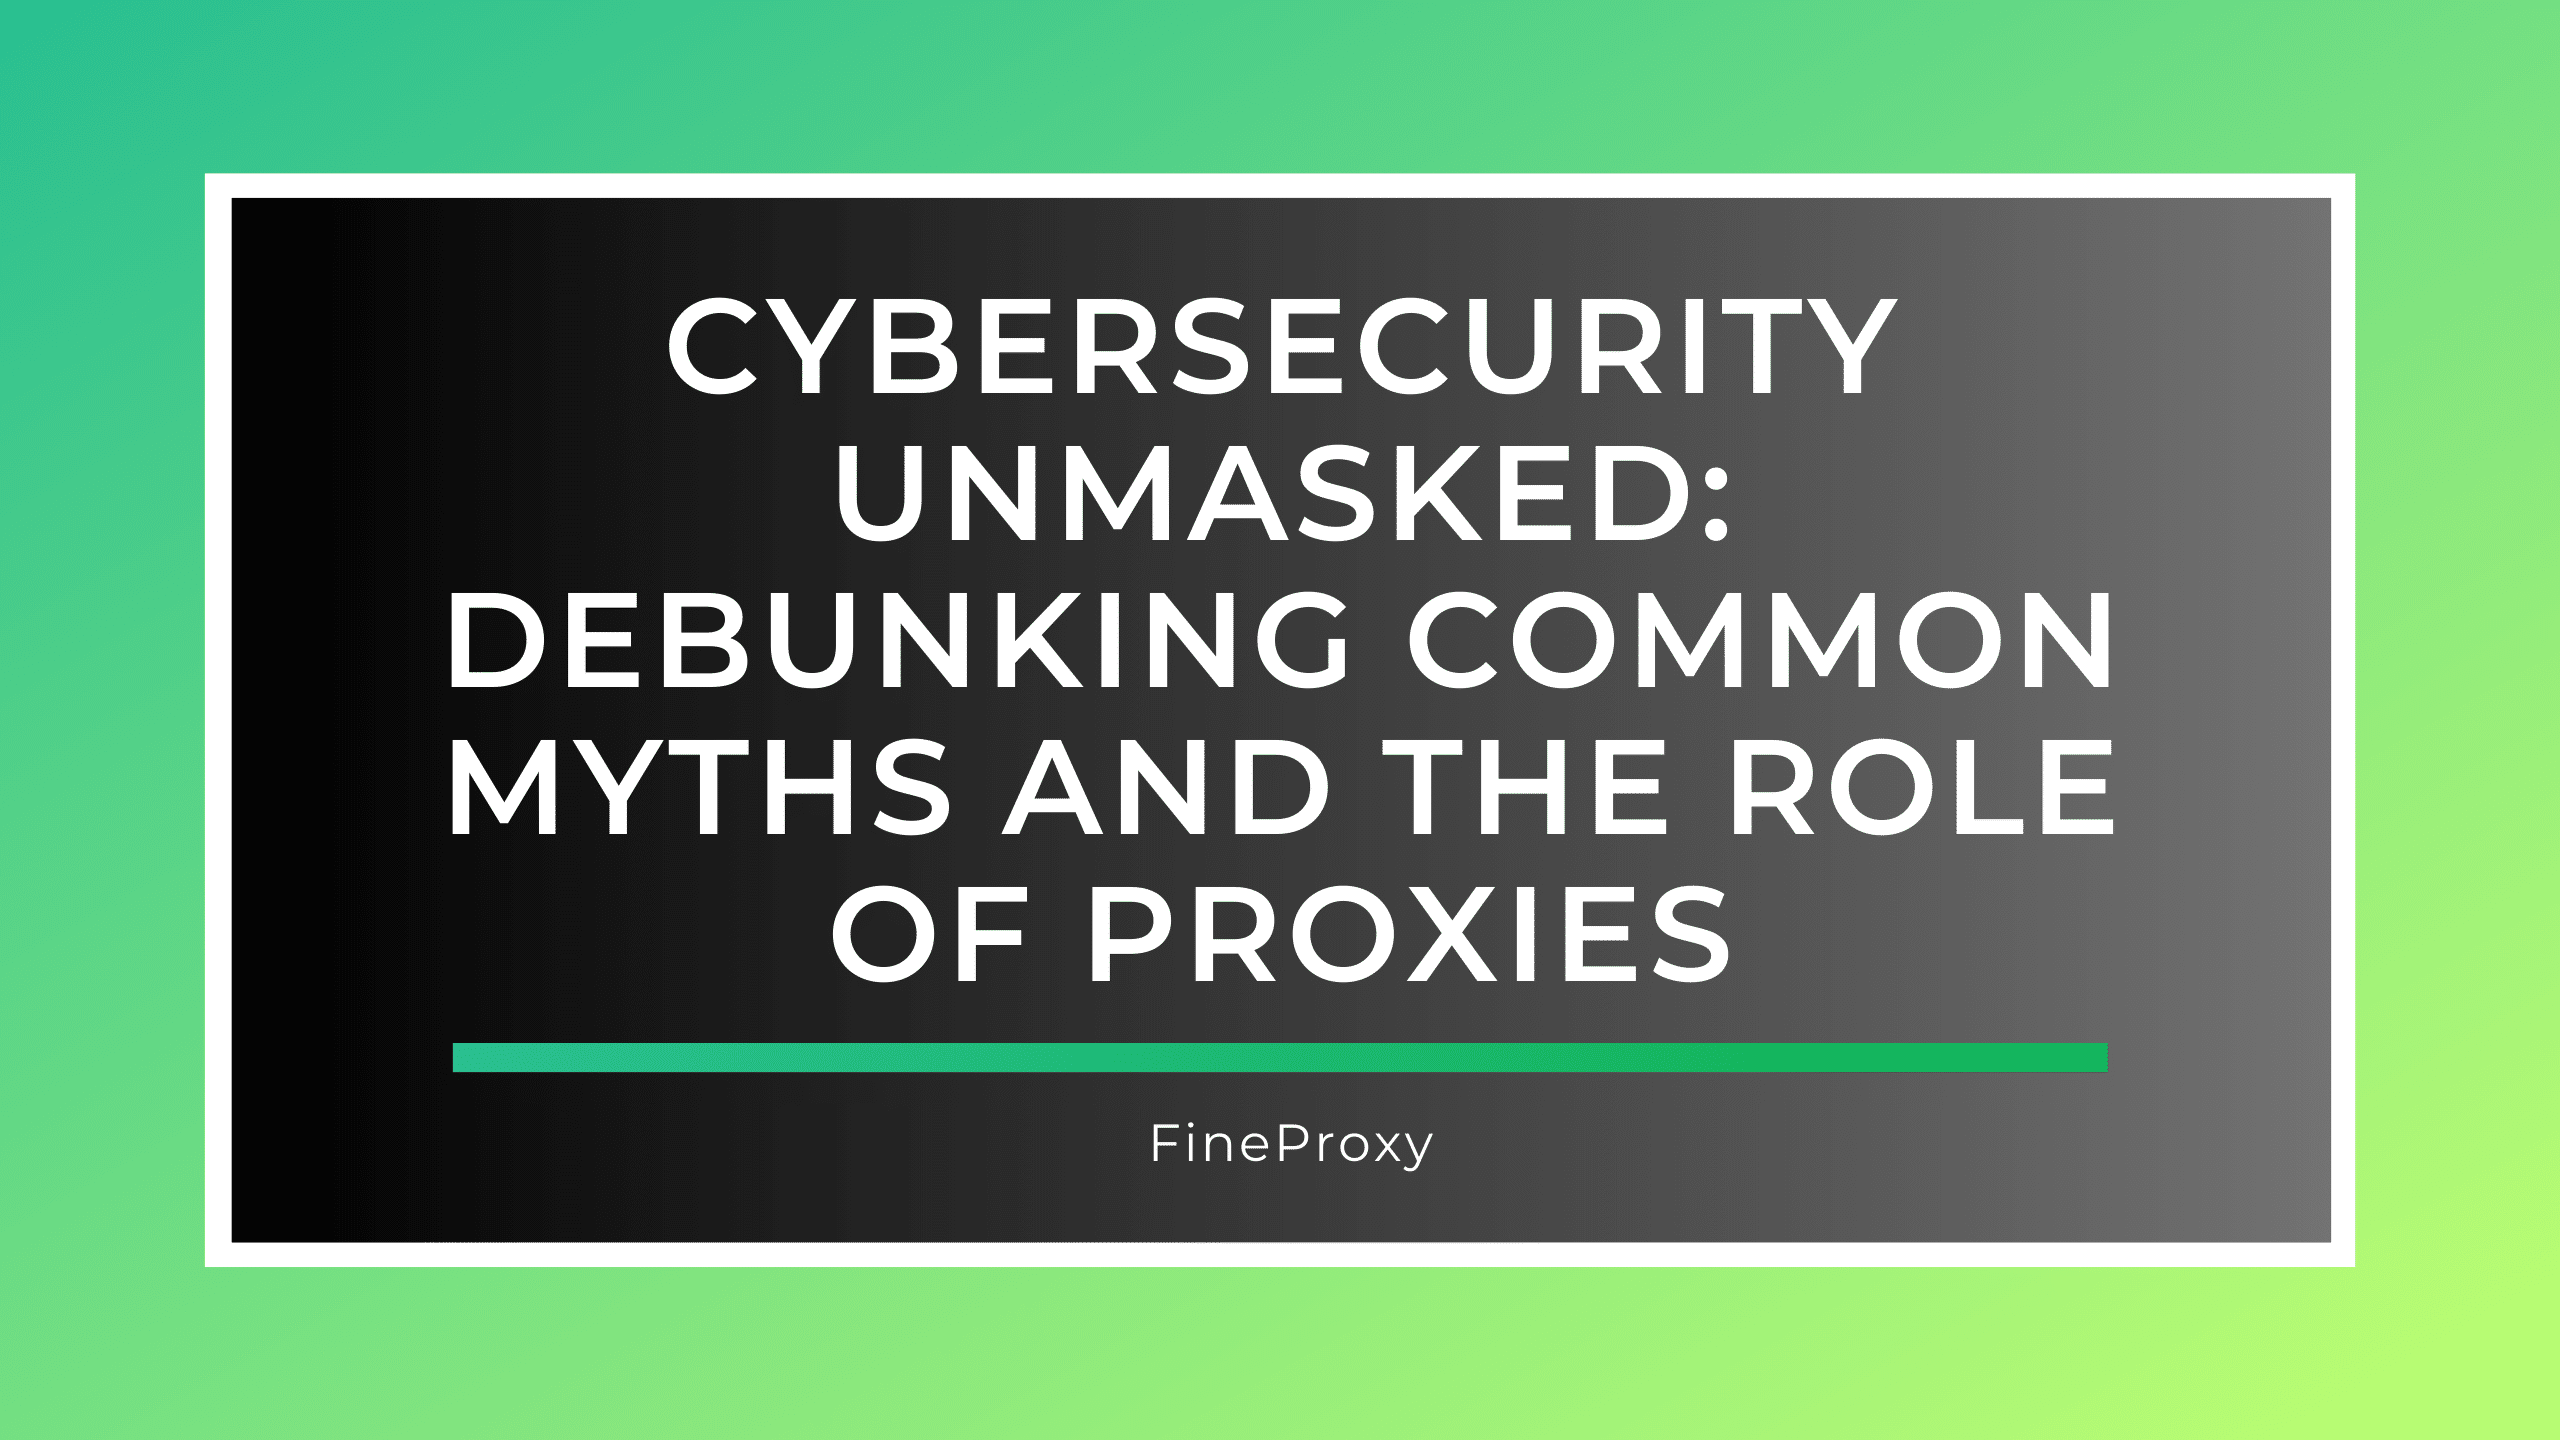 Cybersecurity Unmasked: Debunking Common Myths and the Role of Proxies